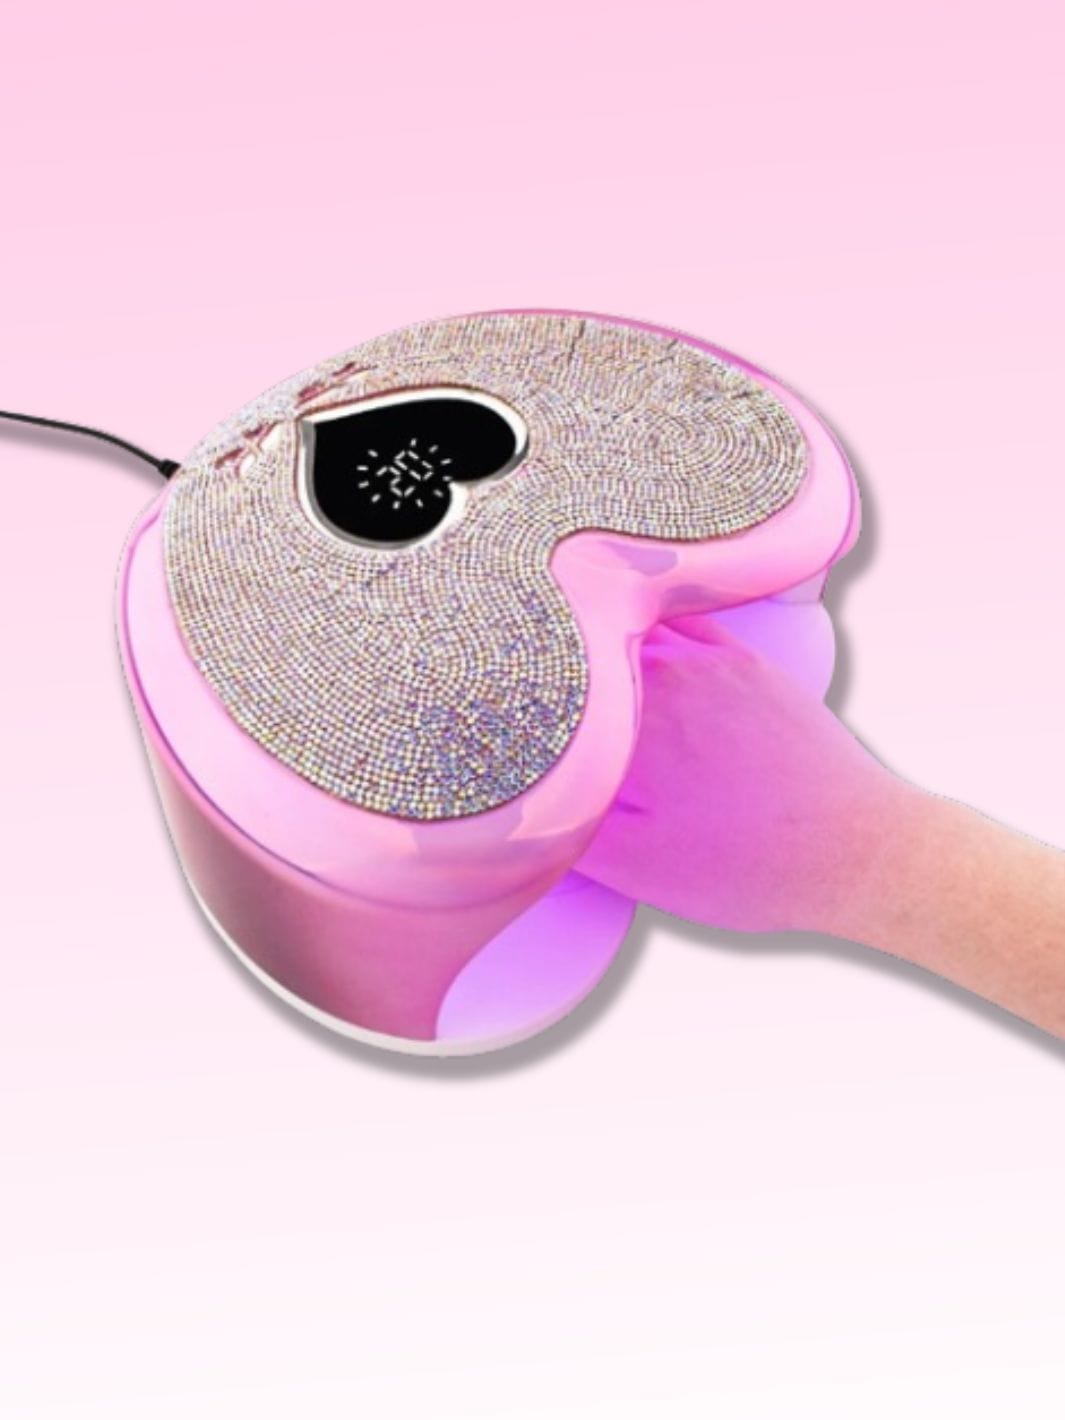 Lampe uv led ongles professionnelle Nail Chic